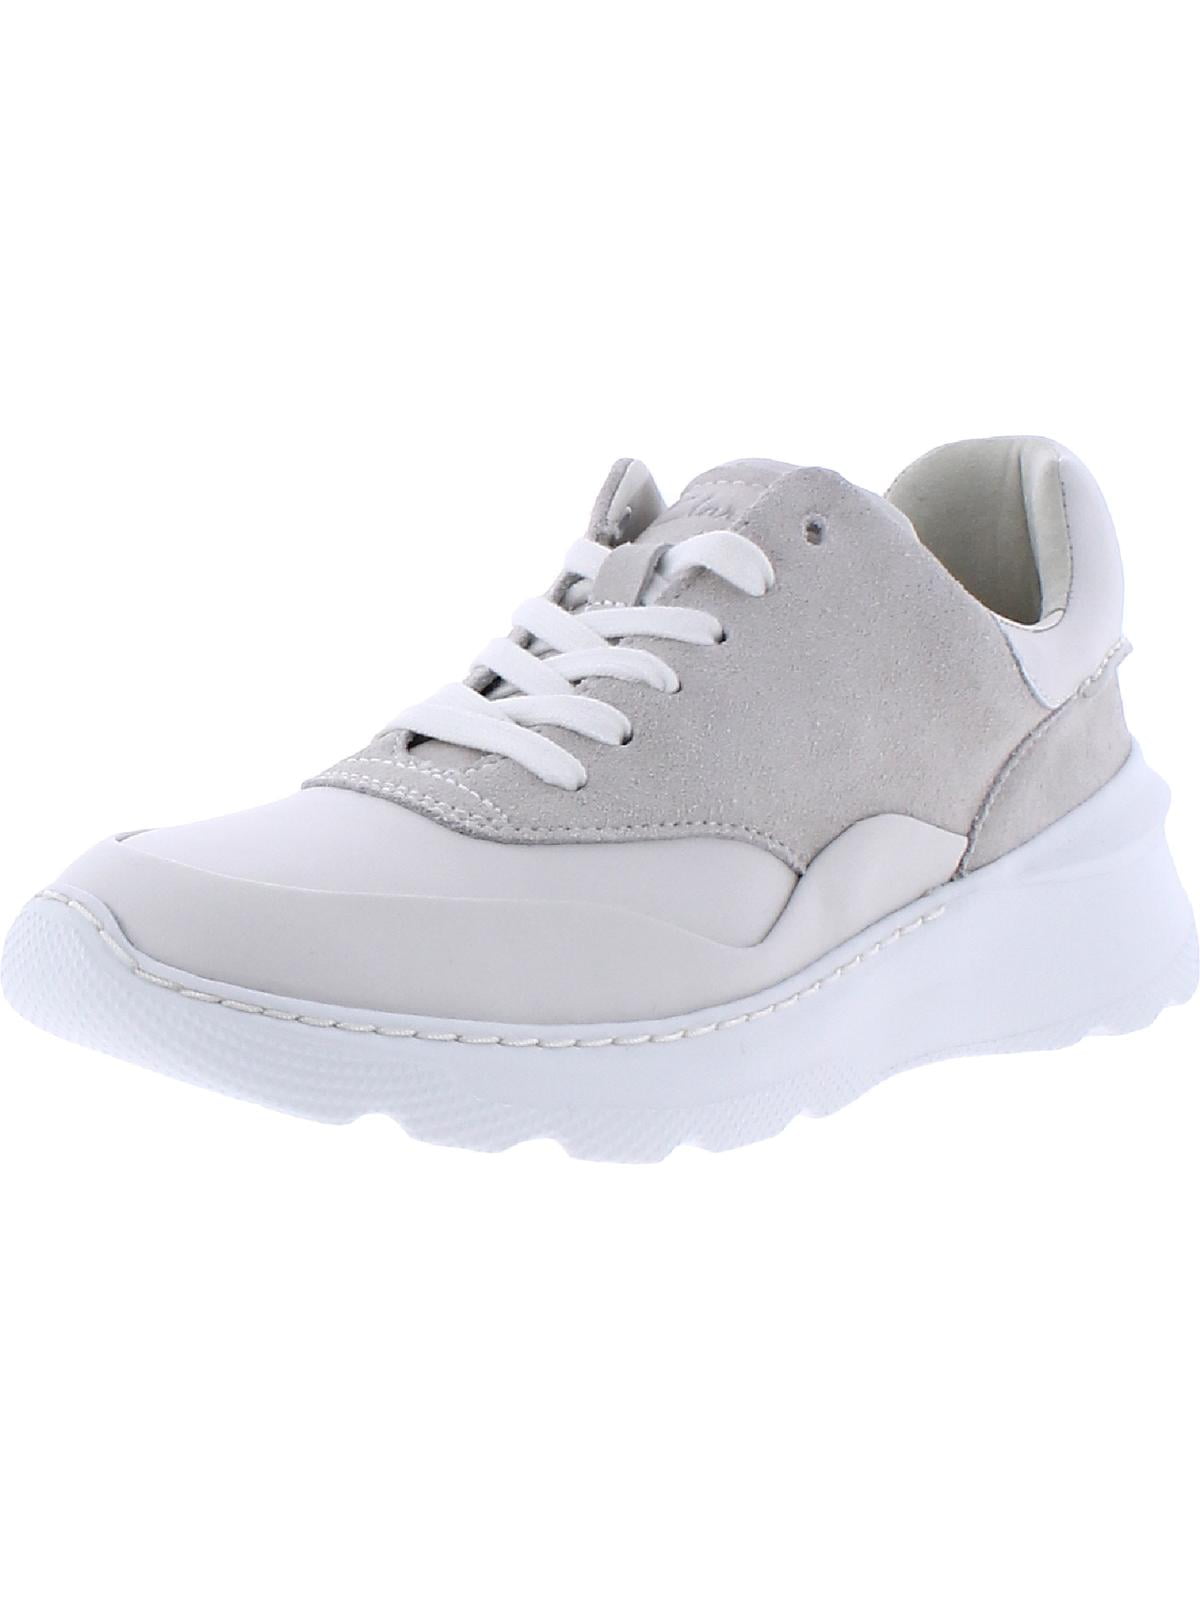 Clarks Sprint Lite Lace Women's Mixed Media Colorblock Athletic ...